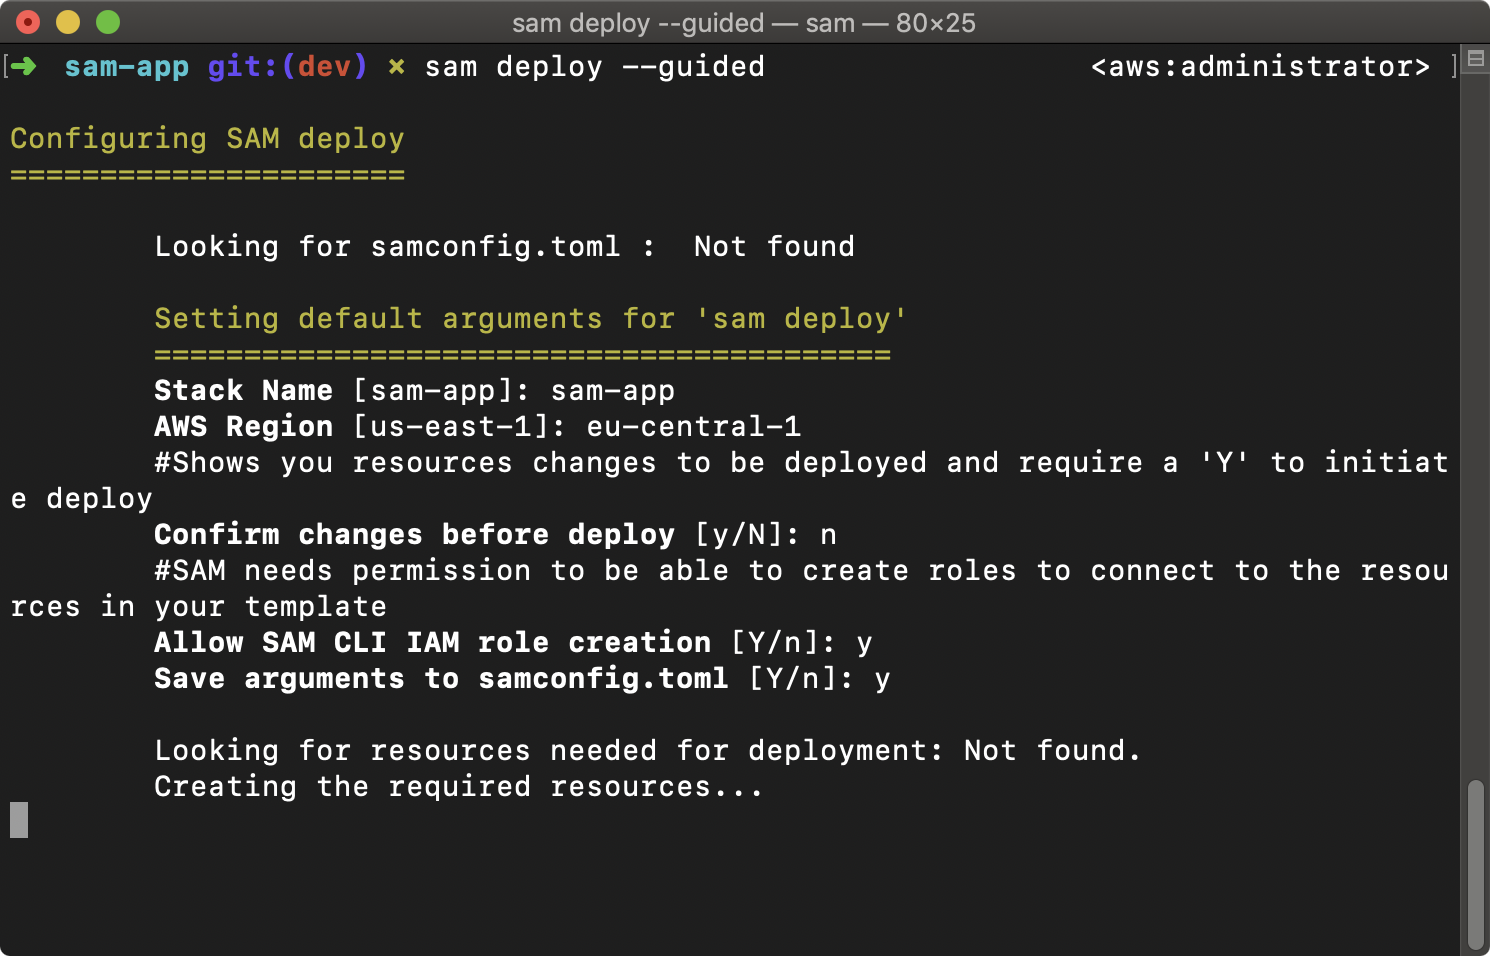 Terminal showing results of 'sam deploy --guided' command.